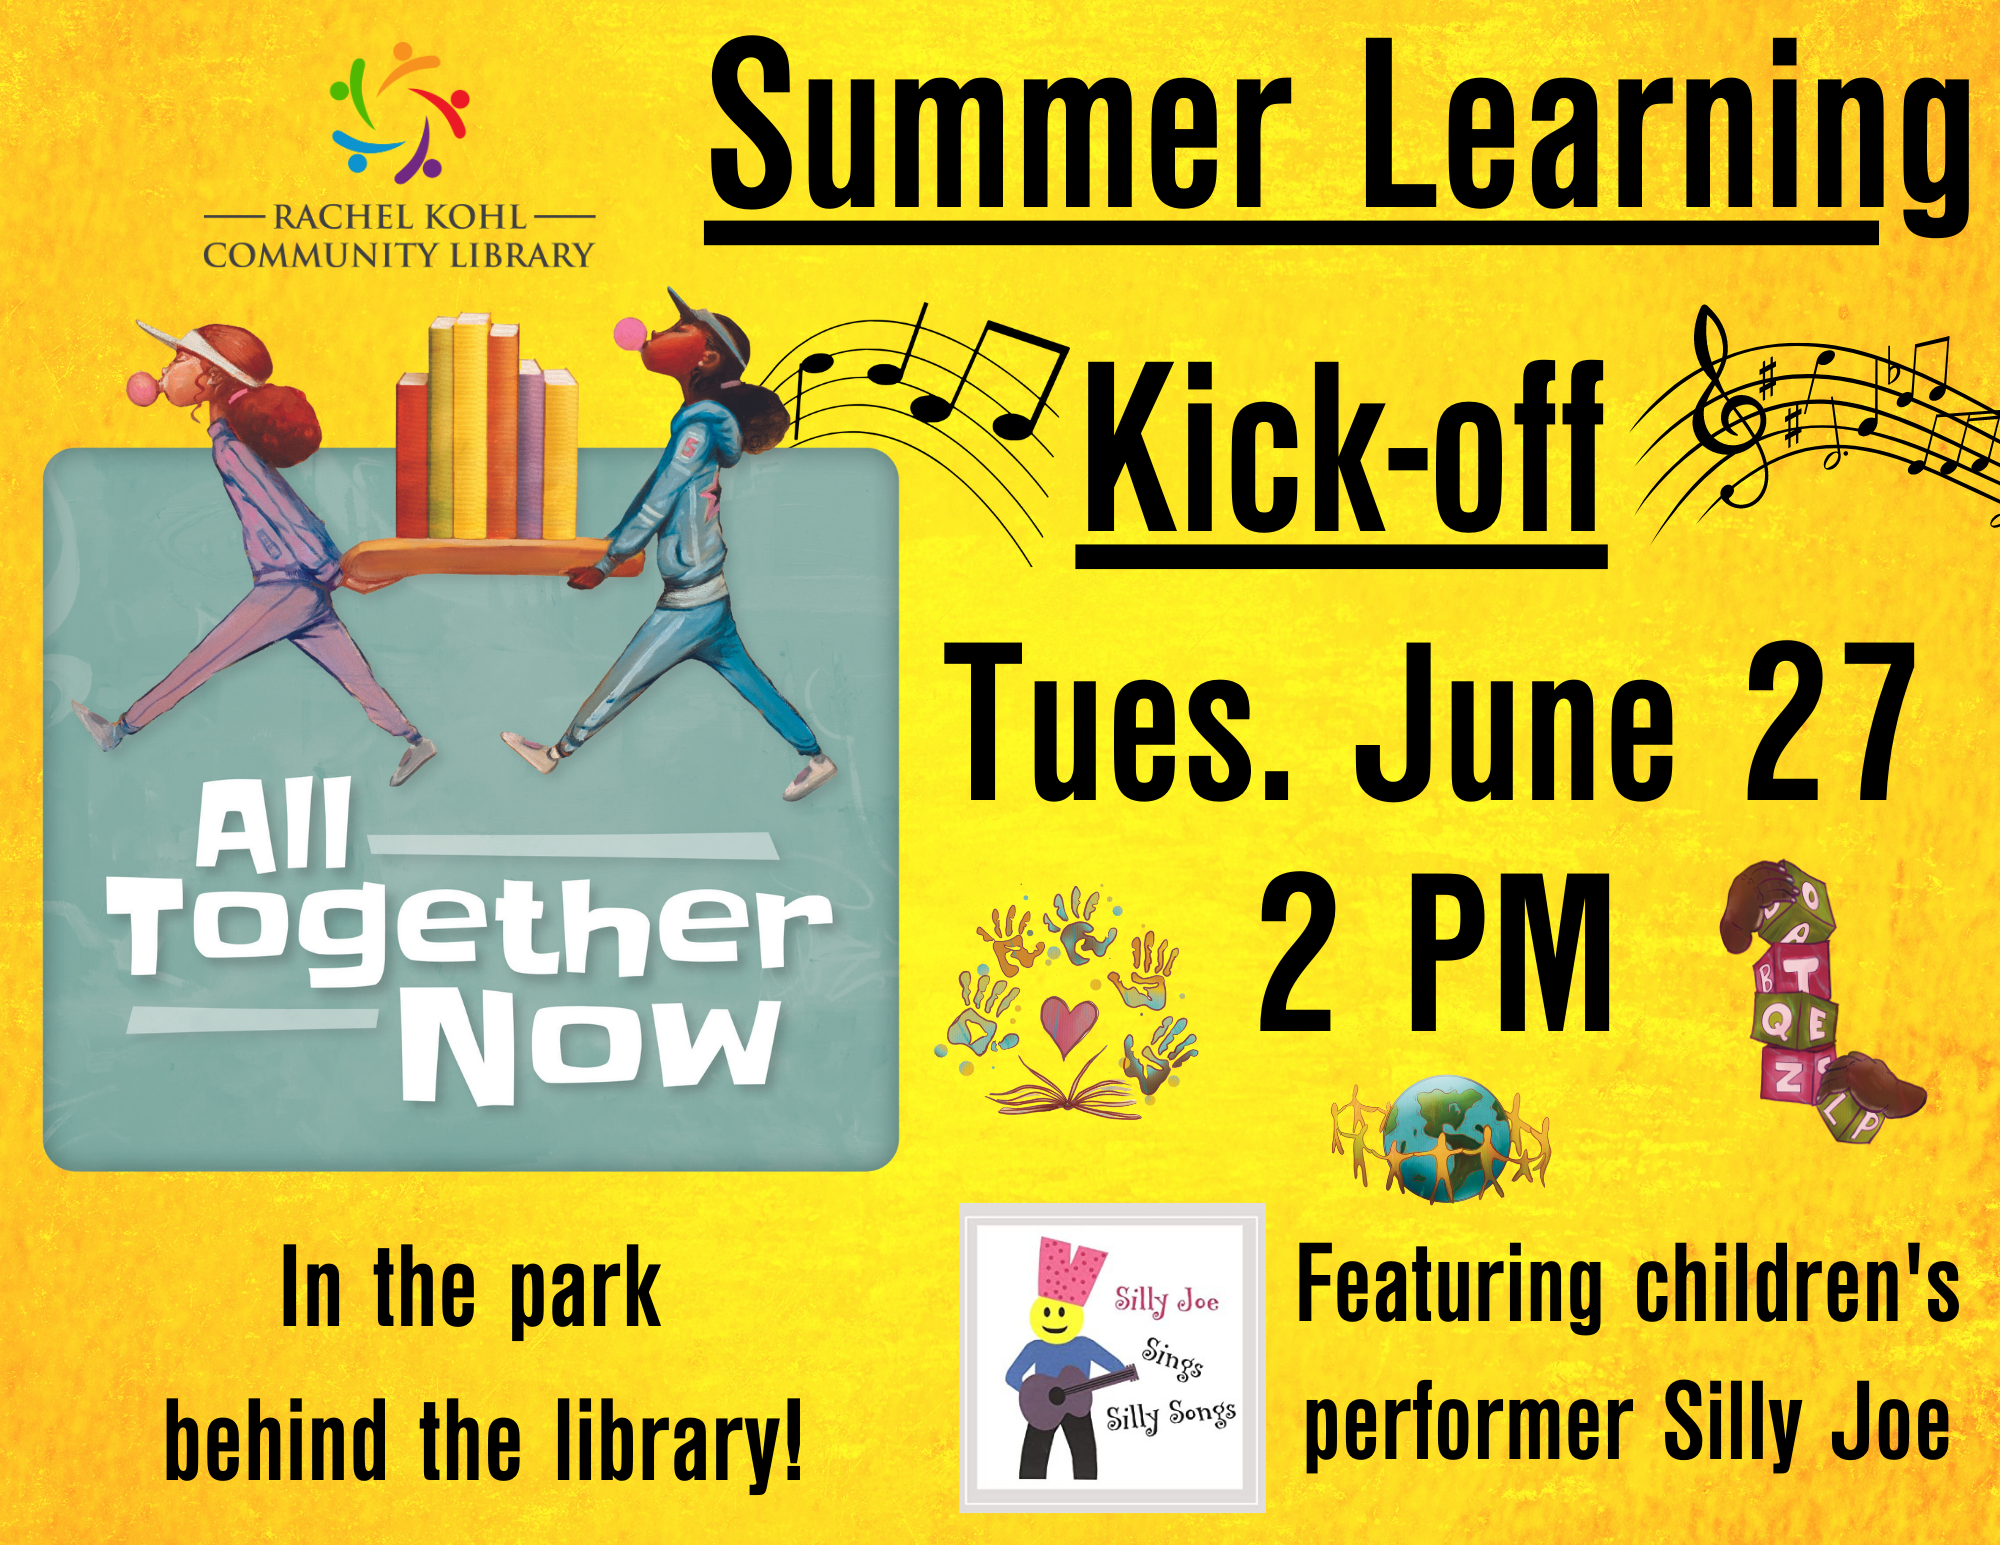 Summer Learning Kick-off Tues. June 27 2 PM In the Park Behind the library. Featuring children's performer Silly Joe.